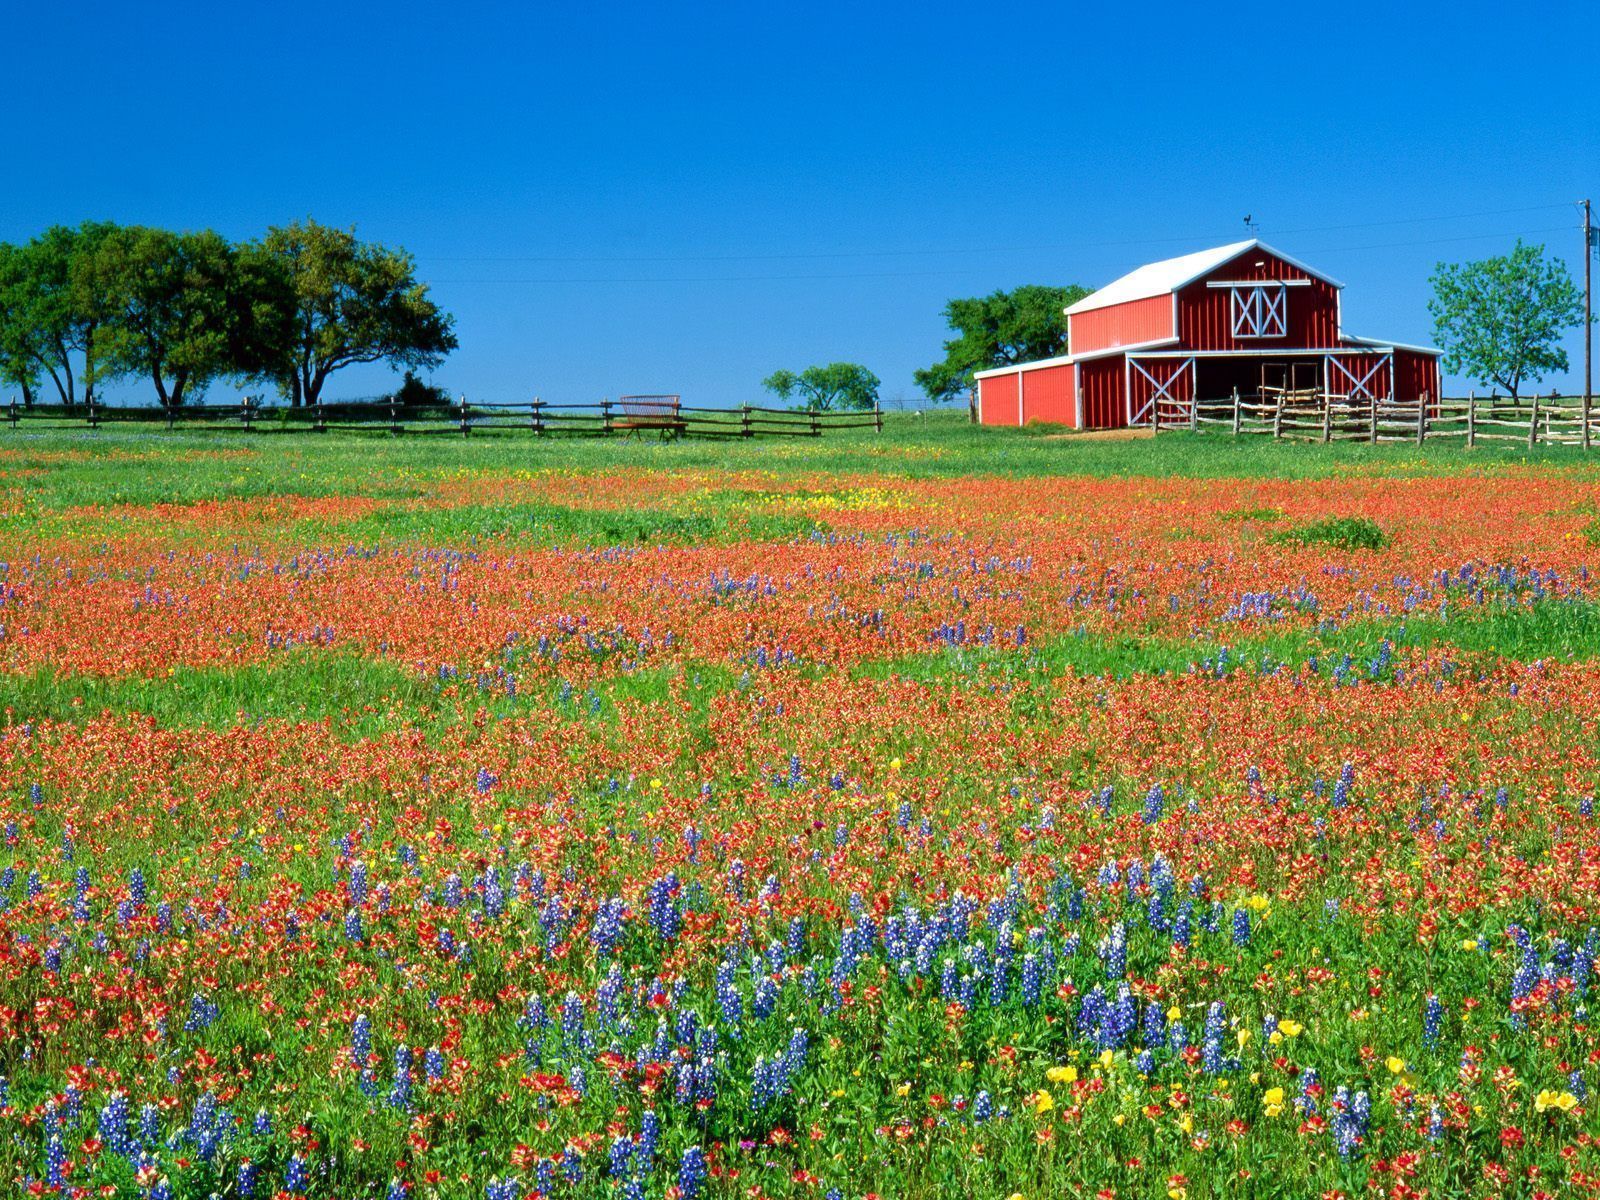 Texas Desktop Wallpaper - HD Wallpapers Backgrounds of Your Choice